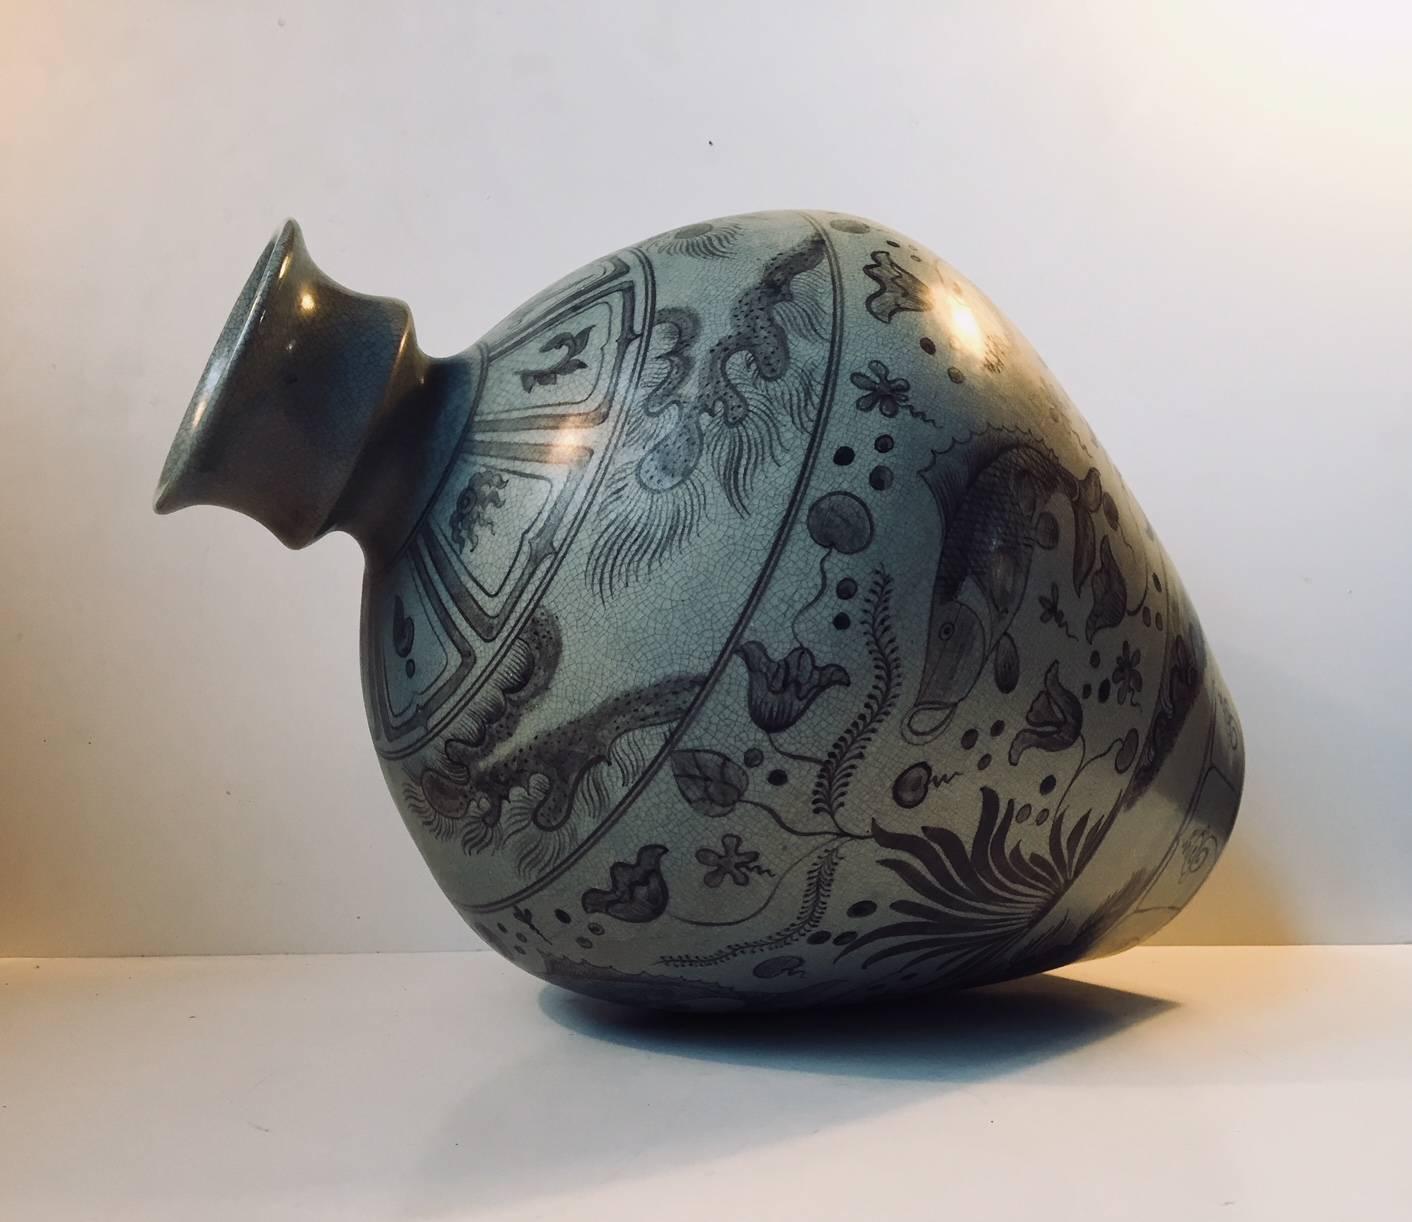 Large unique balloon shaped vase in grey craquele glaze decorated with hand-painted black motif's of fishes and flowers. Created by Lyngby Porcelæn in Denmark during the 1930s.